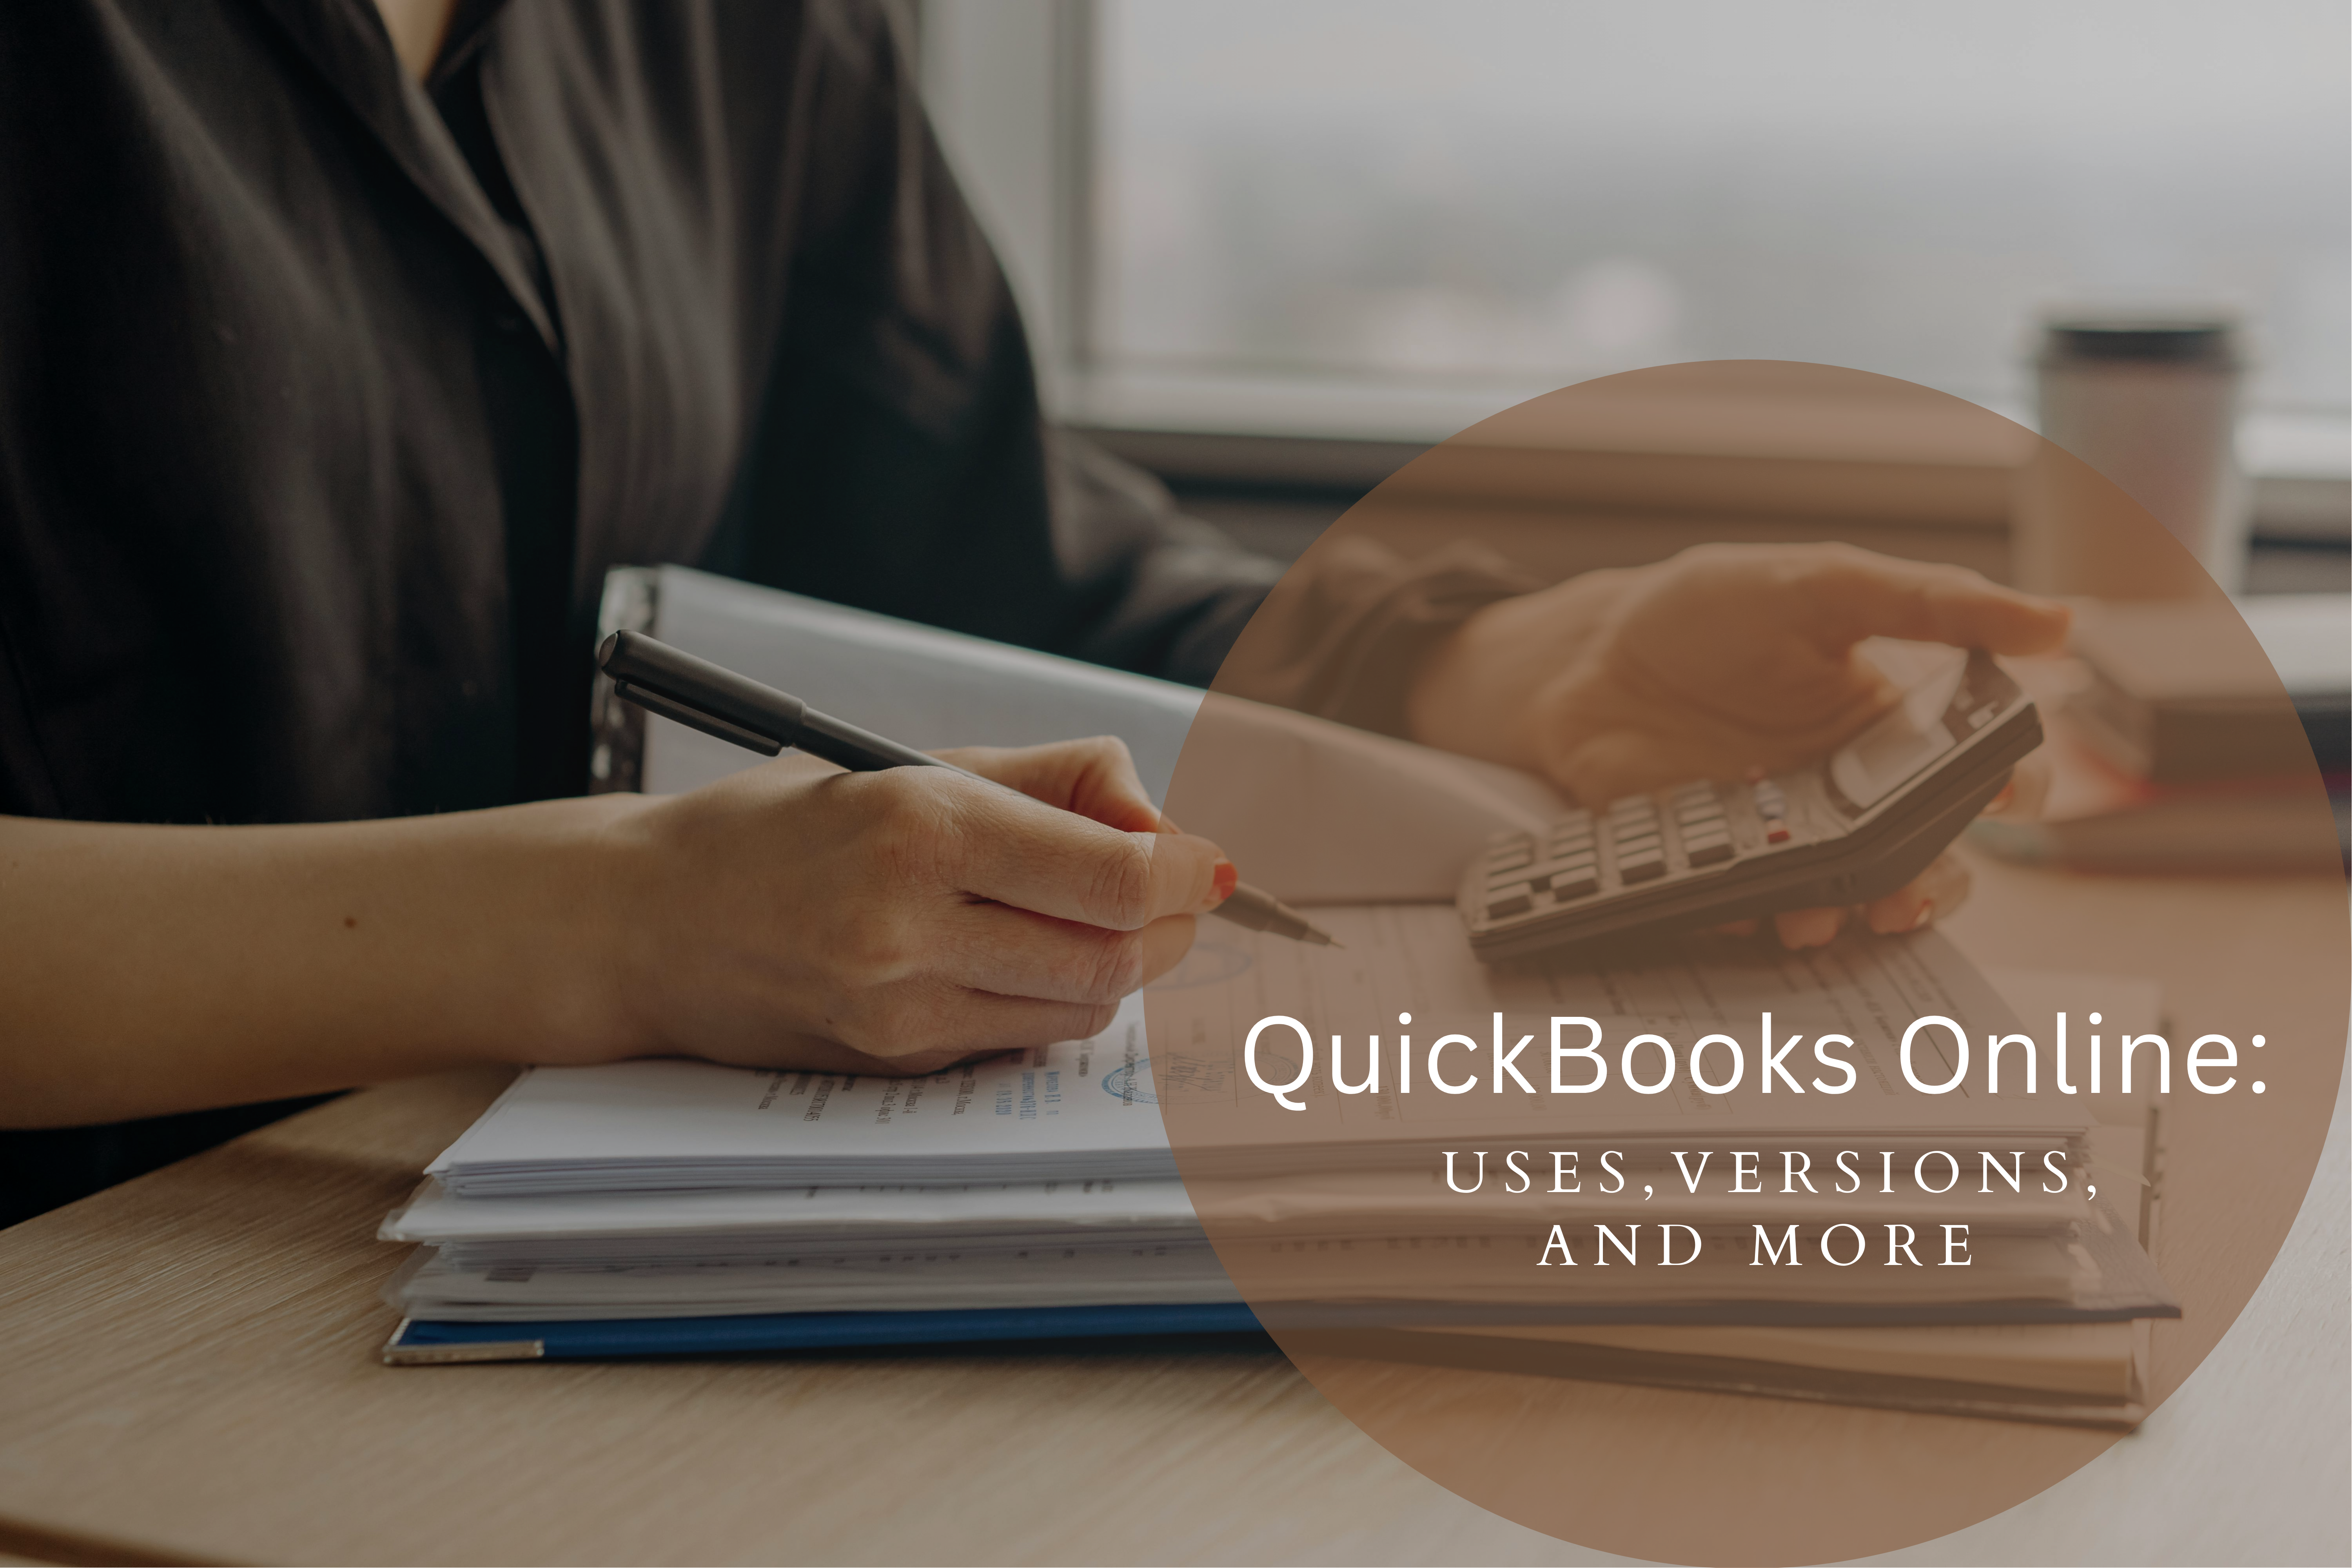 QuickBooks Online: Uses, Versions and more